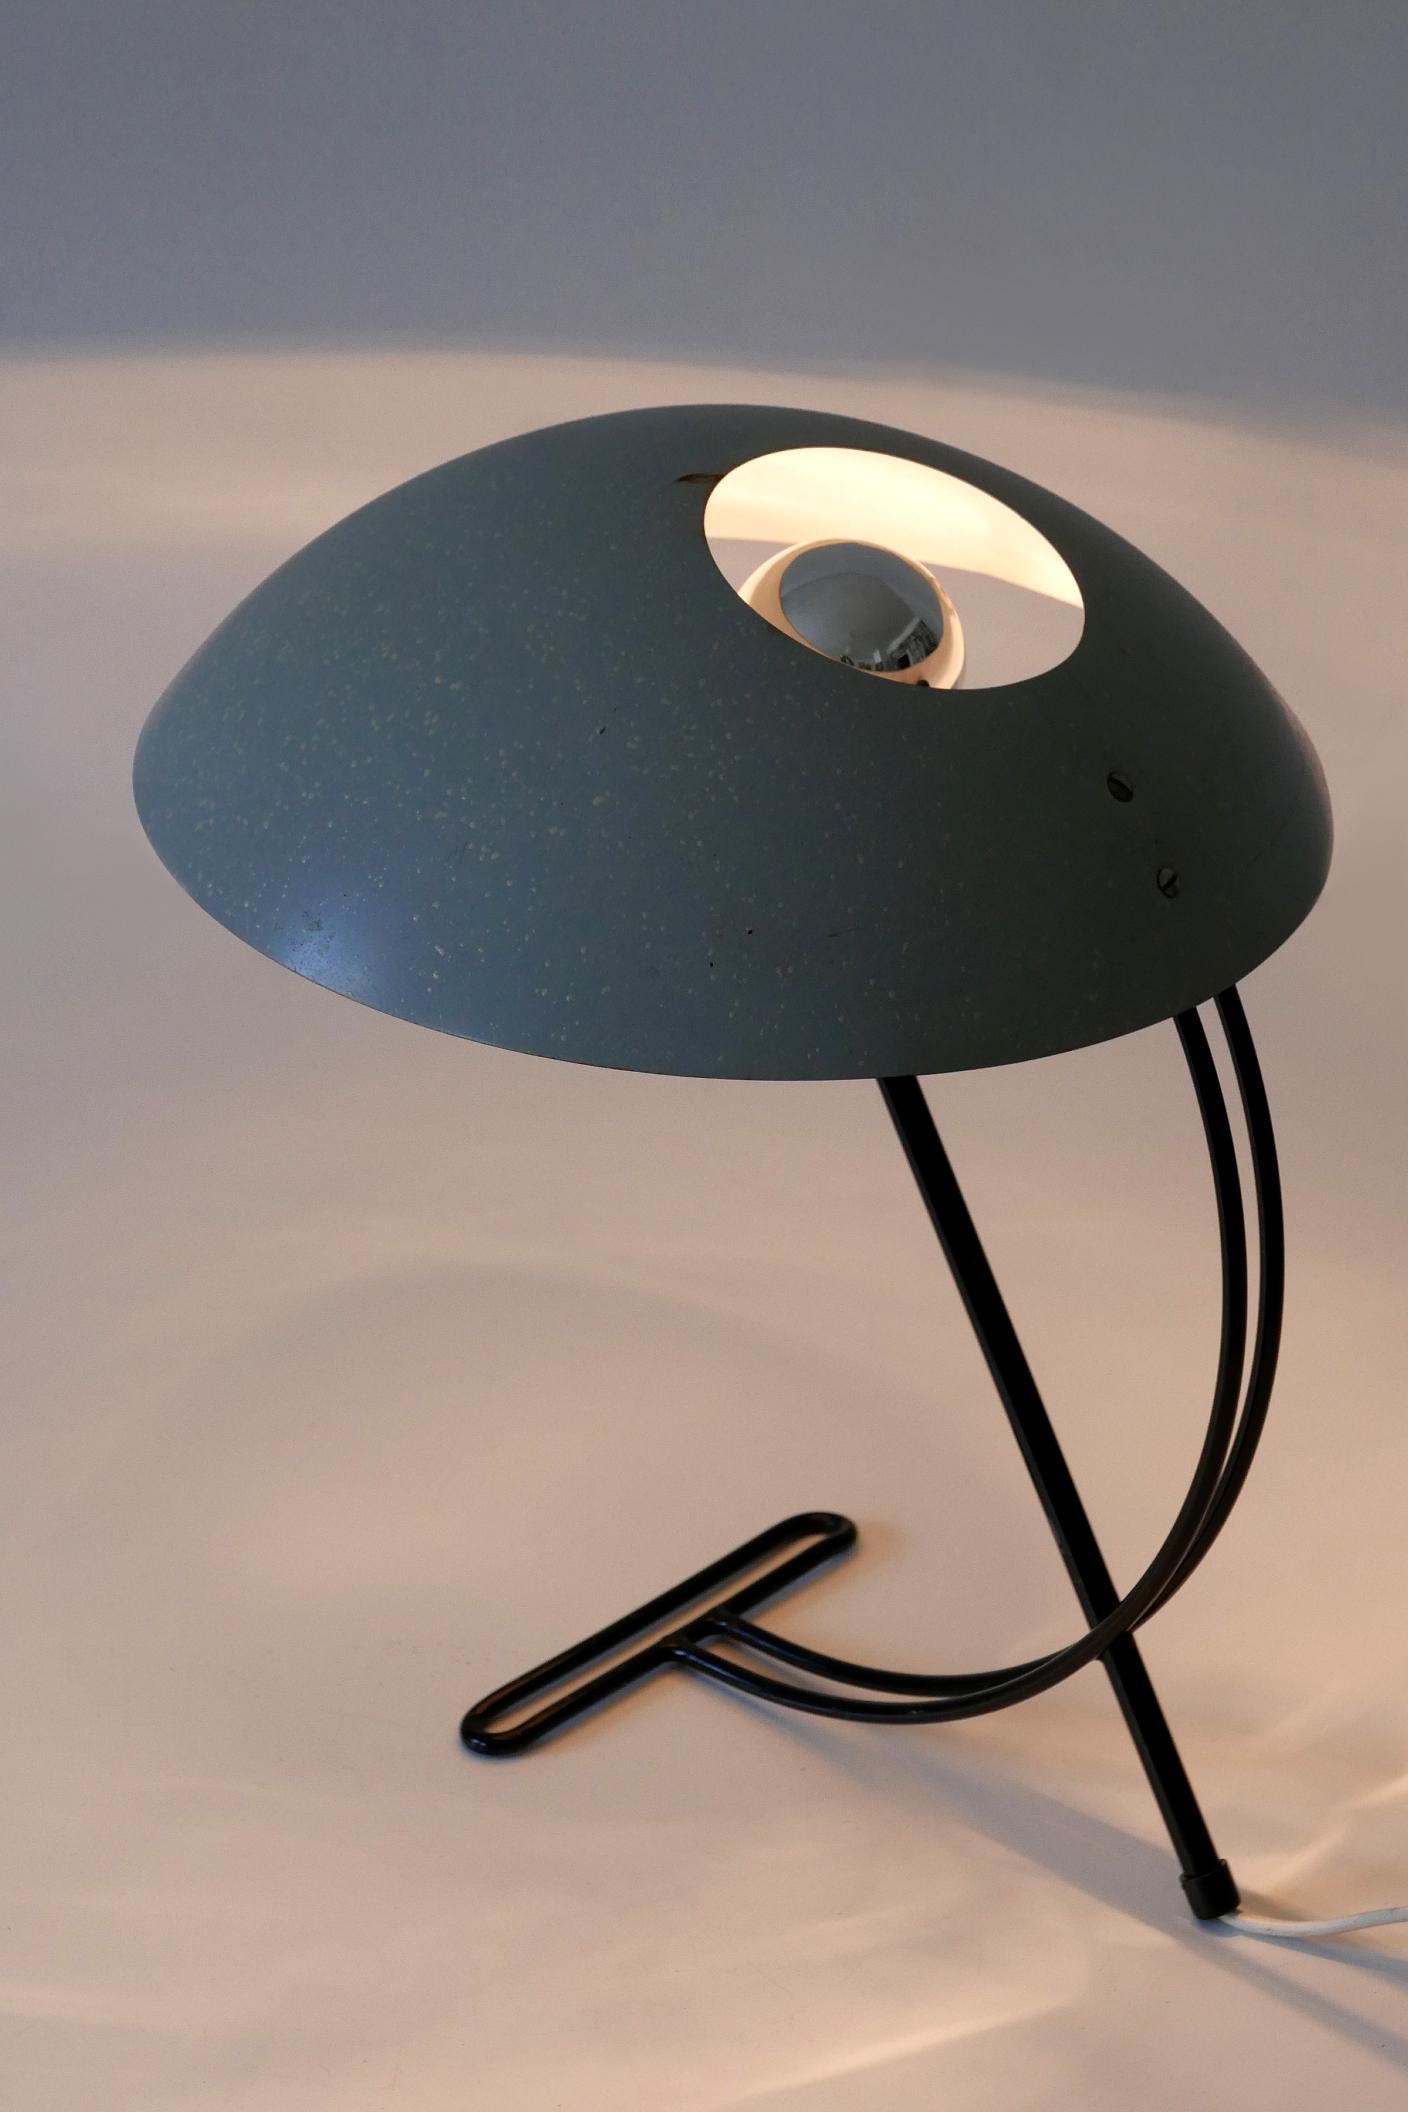 Elegant Mid-Century Modern NB100 table lamp or desk light. Designed by Louis Kalff for Philips, Netherlands, 1950s.

Executed in metal tube and sheet, the table lamp comes with 1 x E27 / E26 Edison screw fit bulb holder, is wired, in working